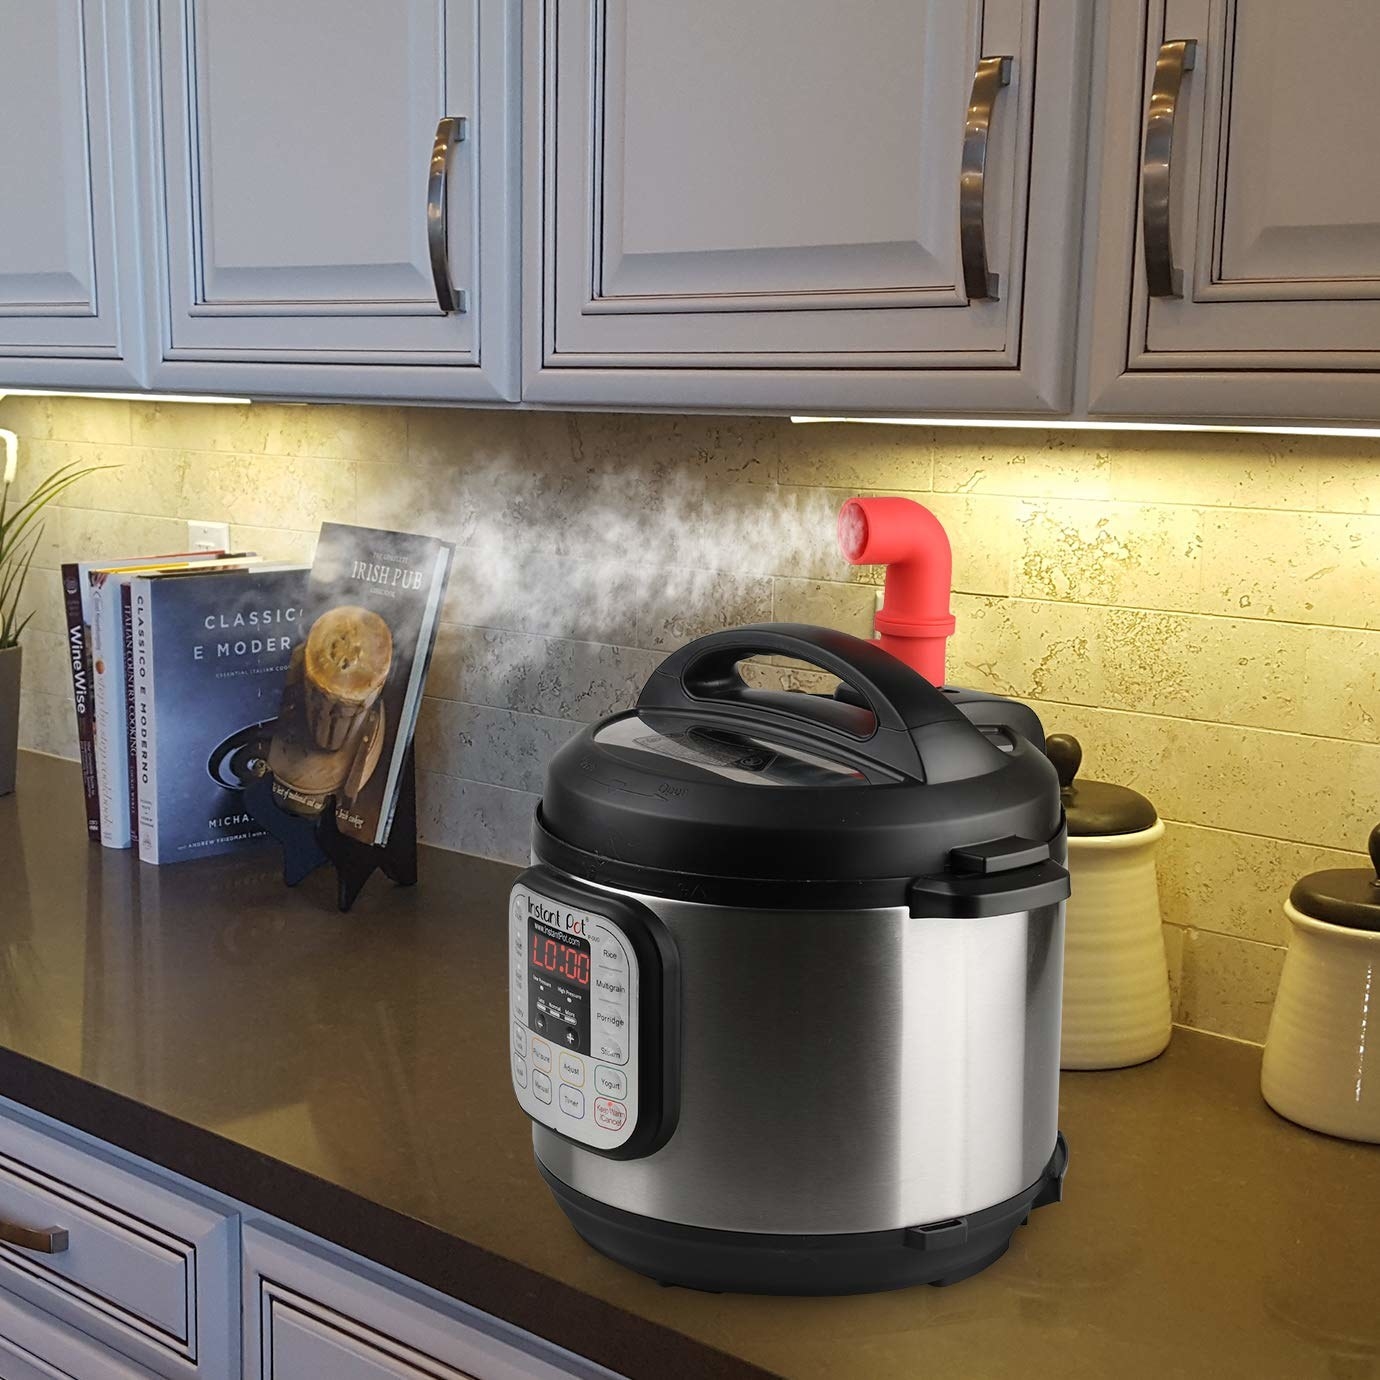 A rendering of the spout like vent moving steam off to the side of the instant pot